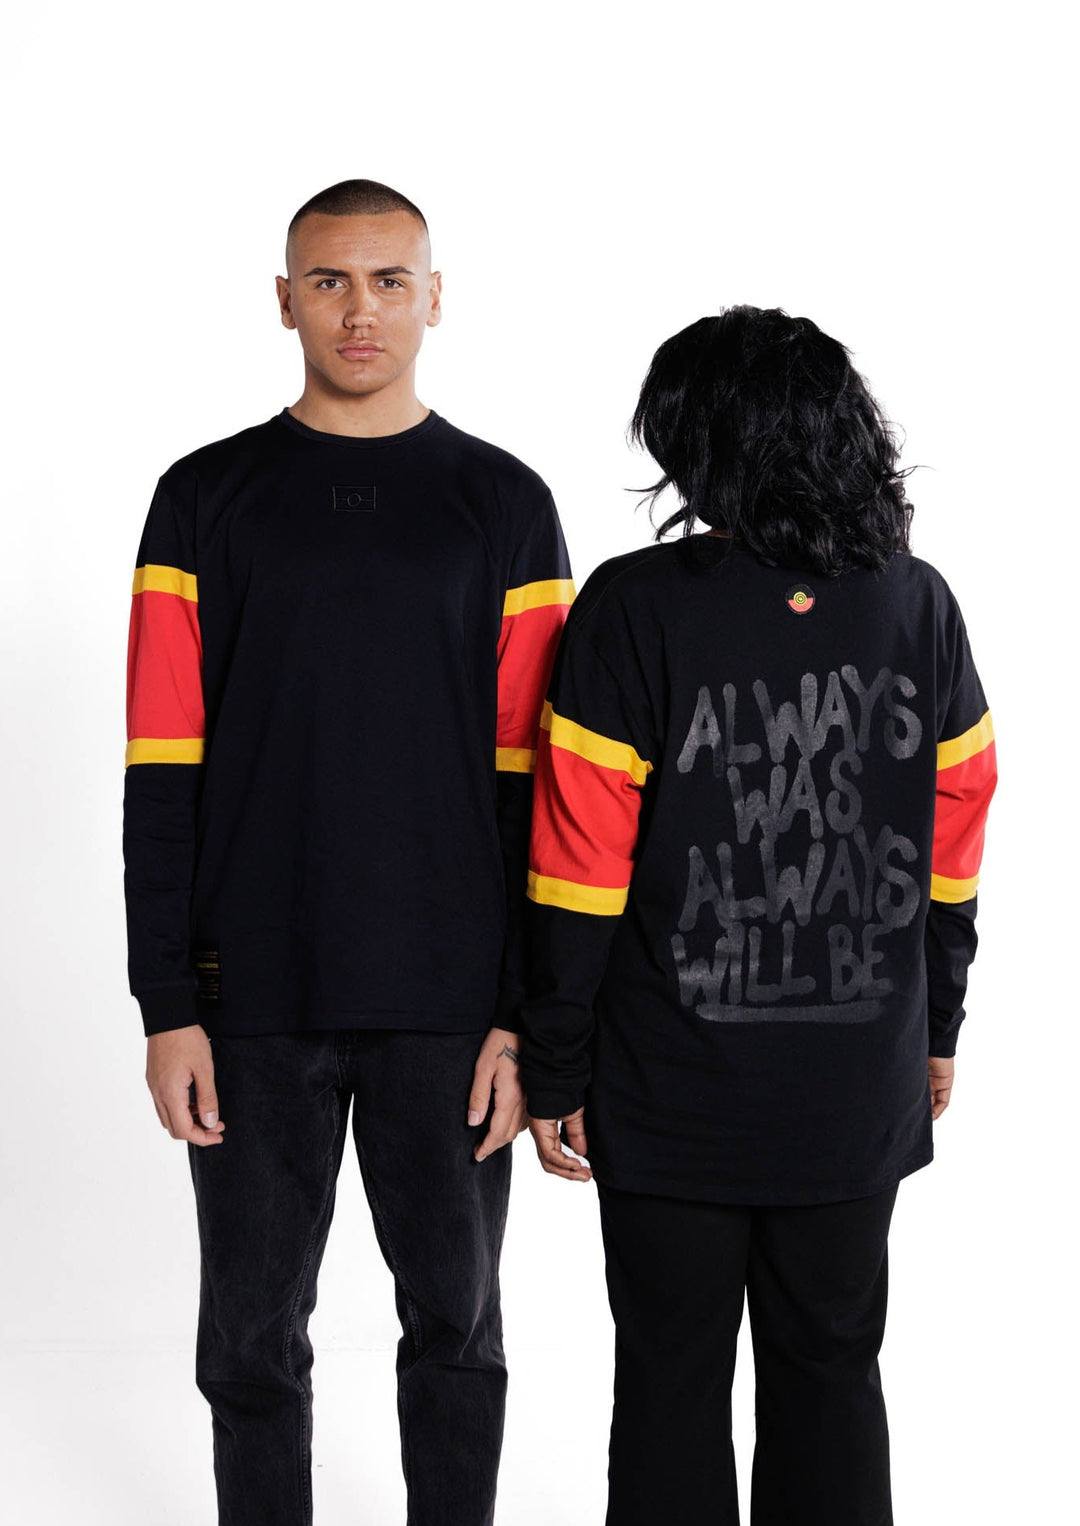 Clothing The Gaps. Black Power Longsleeve. Red, black and yellow sleeves. Aboriginal flag outline embroidered in black on the front. On the back of the hoodie a screen printed powerful Aboriginal chant 'Always Was, Always Will Be' looks like it has been sprayed on with a black spray can! The Clothing the Gaps circle logo patch of red, black and yellow just below neckline centred on upper back.